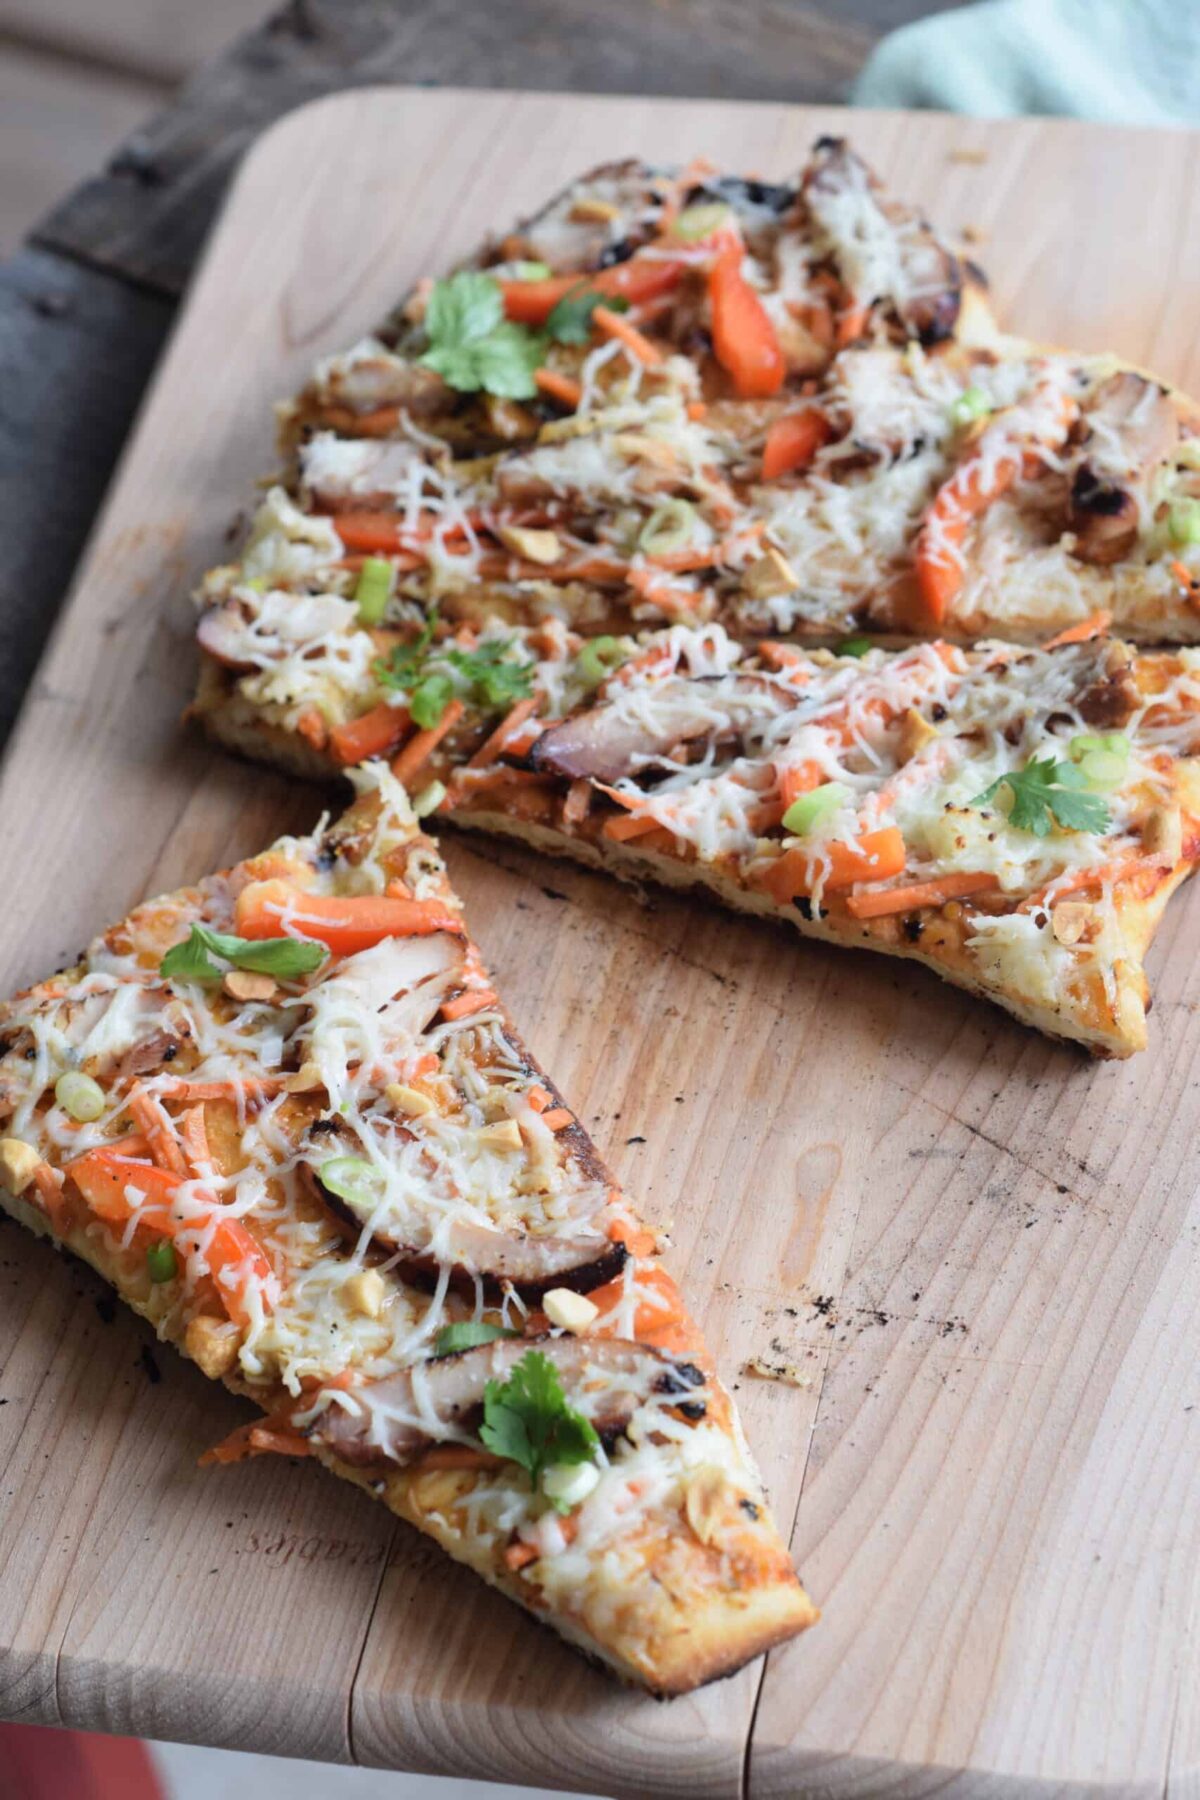 Thai Grilled Chicken Pizza made with Naan bread on wooden cutting board with slice cut off